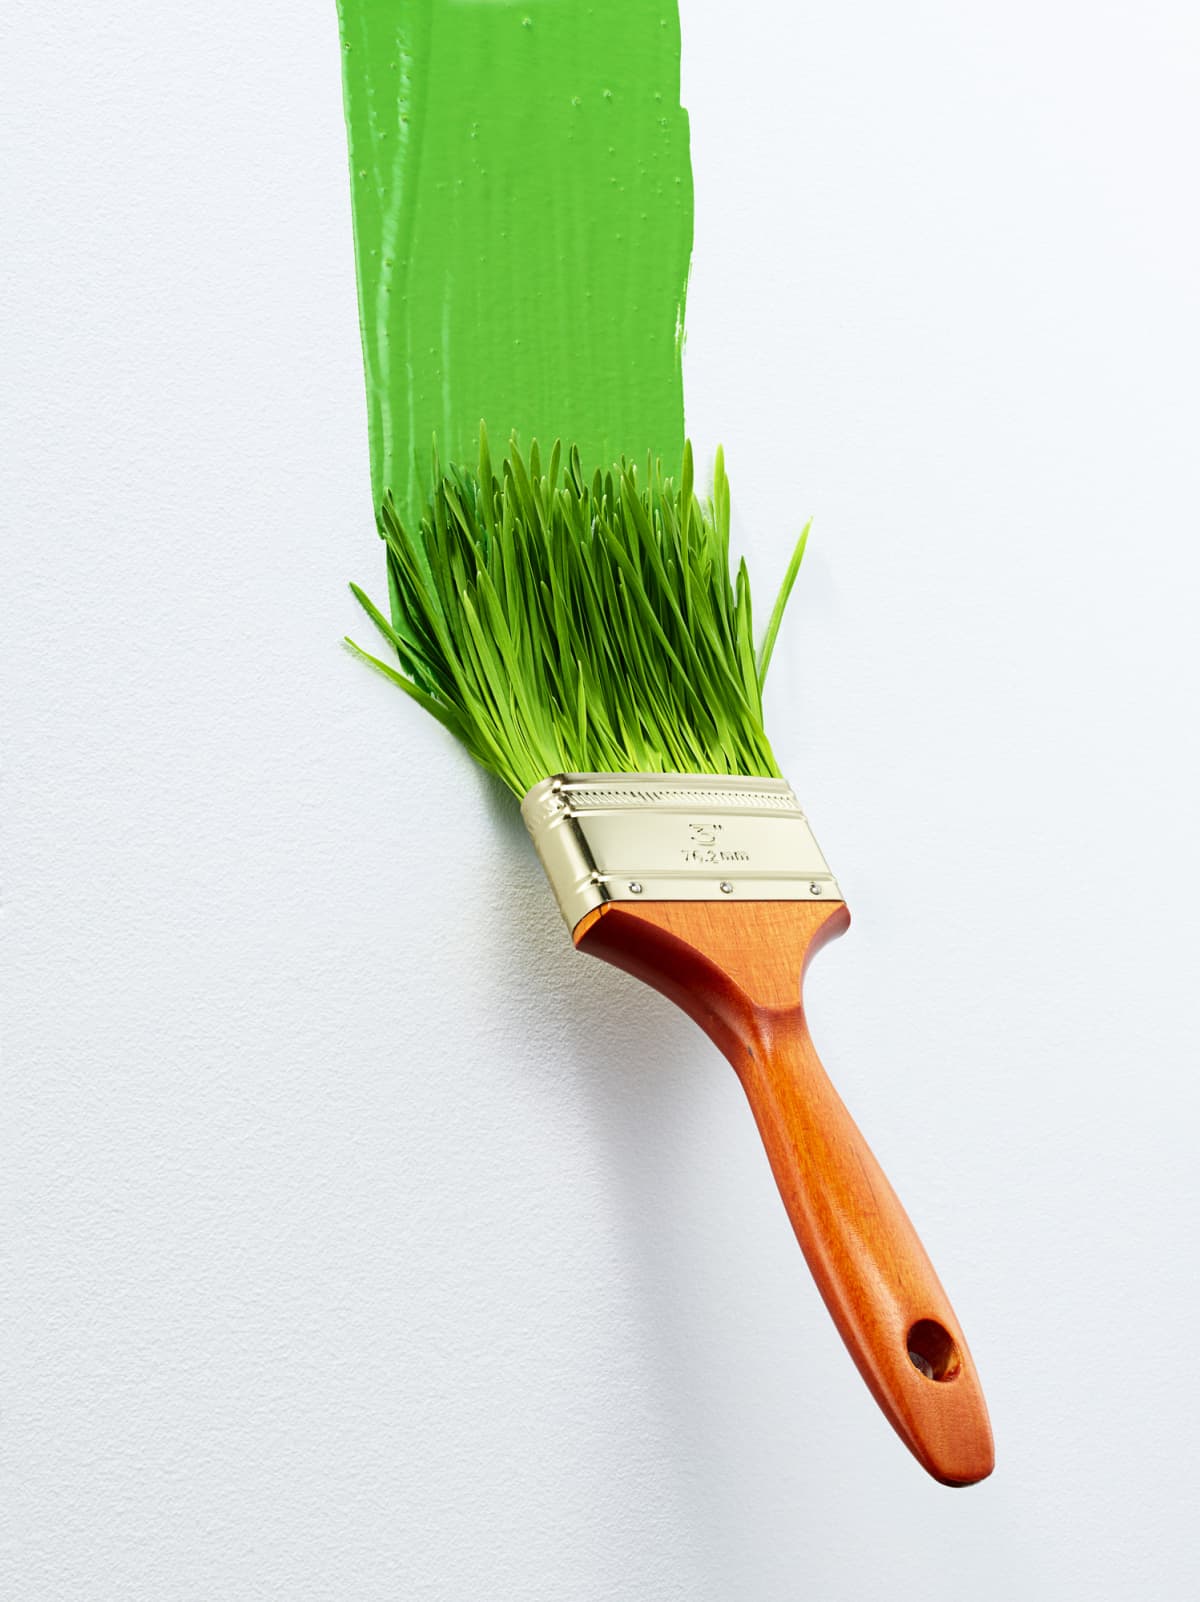 Painting a wall with green paint